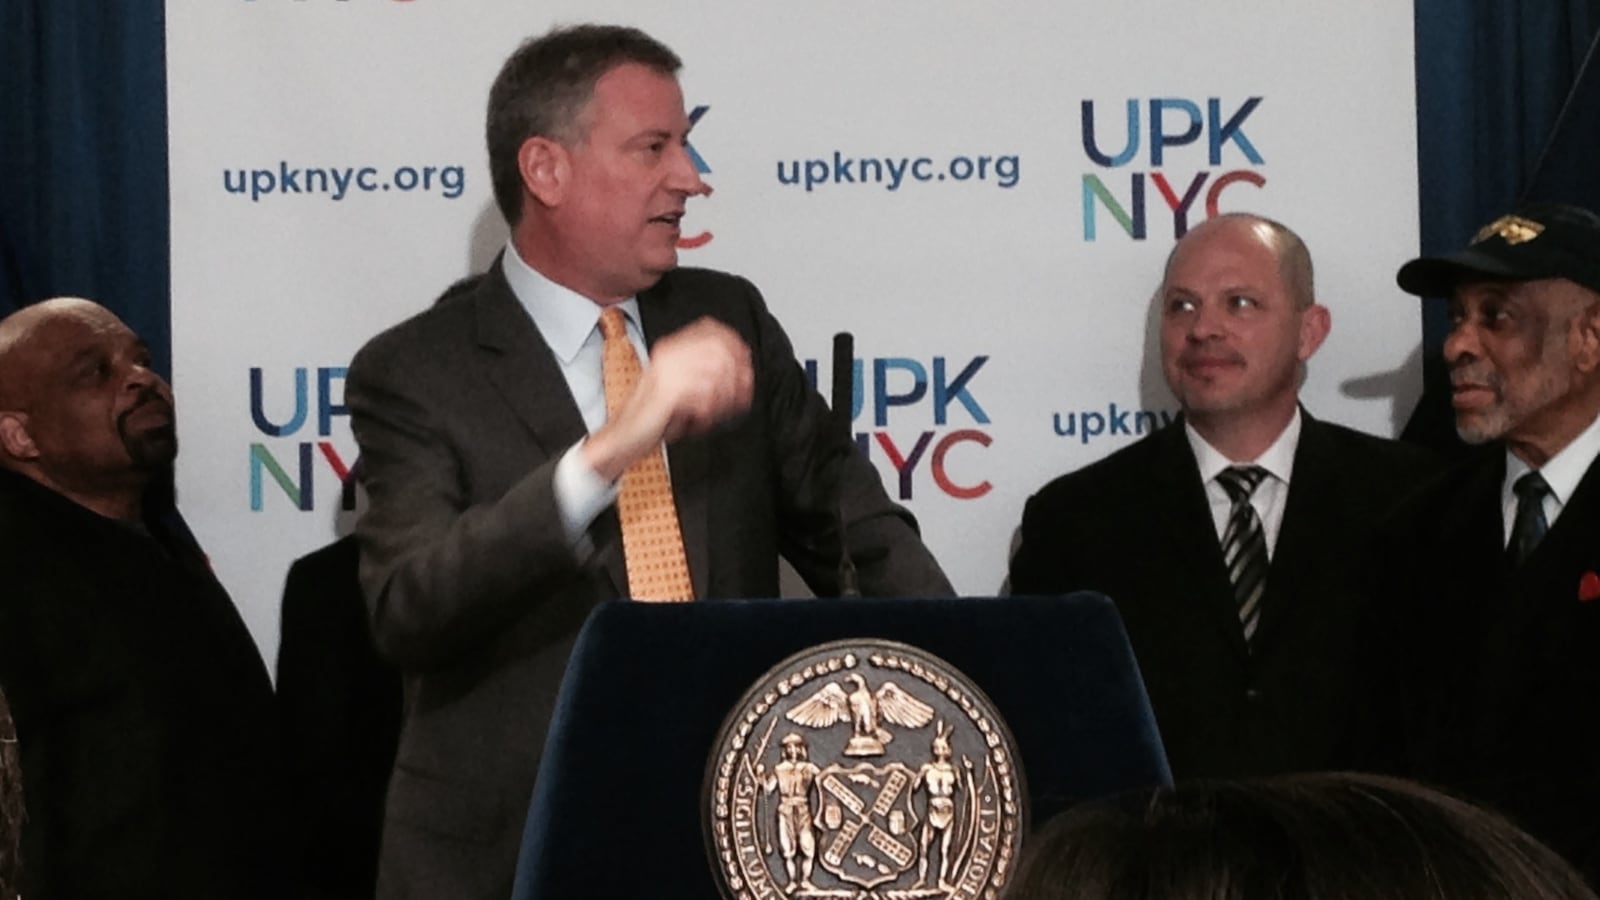 Mulgrew alongside Mayor Bill de Blasio this morning at a press conference to announce labor support for his pre-kindergarten tax plan.